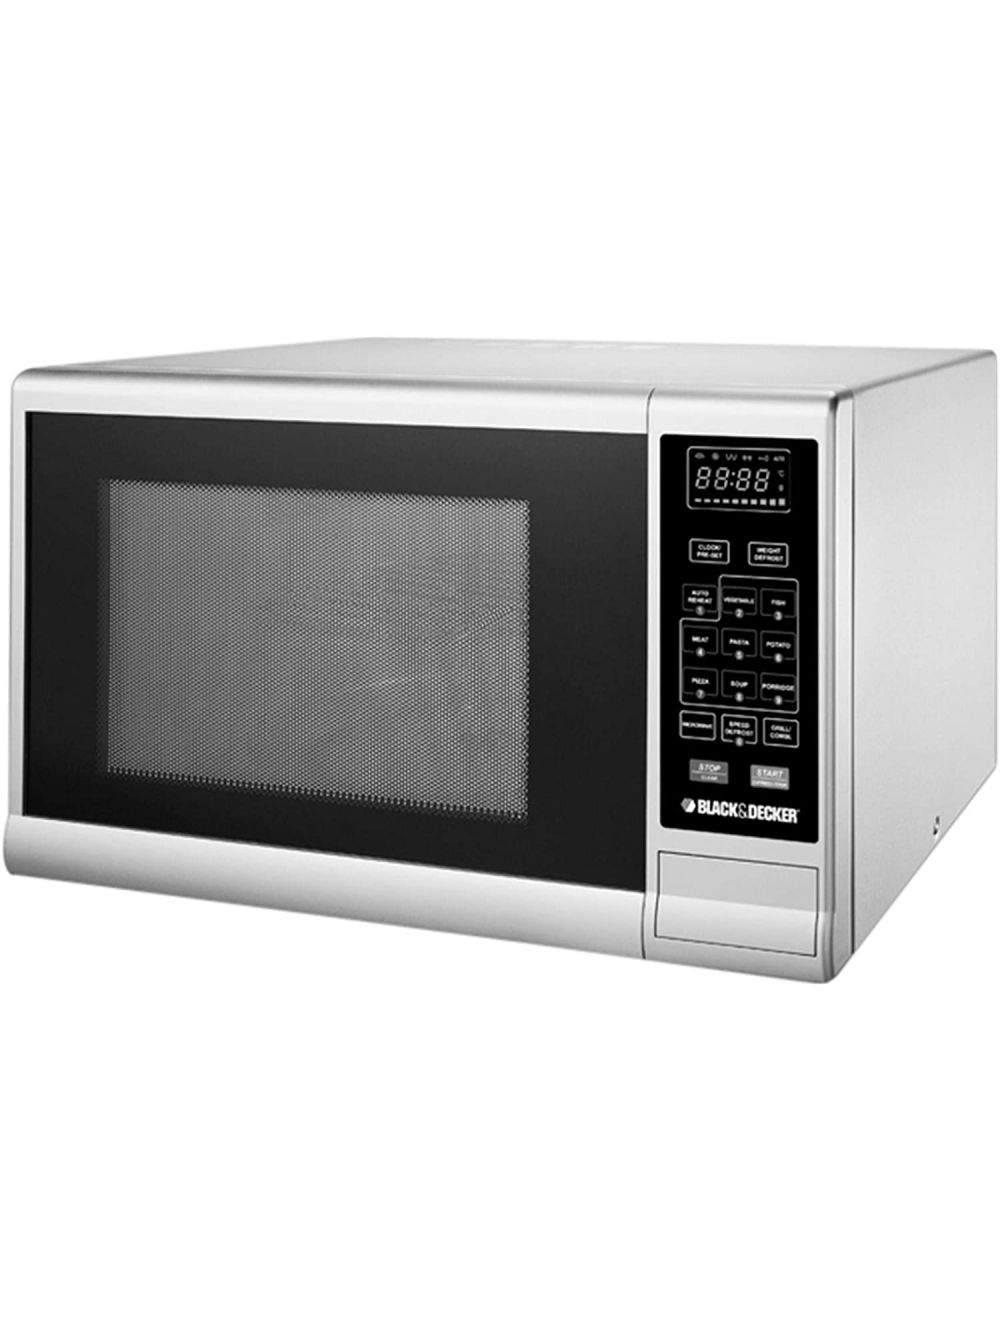 30L Microwave oven with grill-MZ3000PG-B5